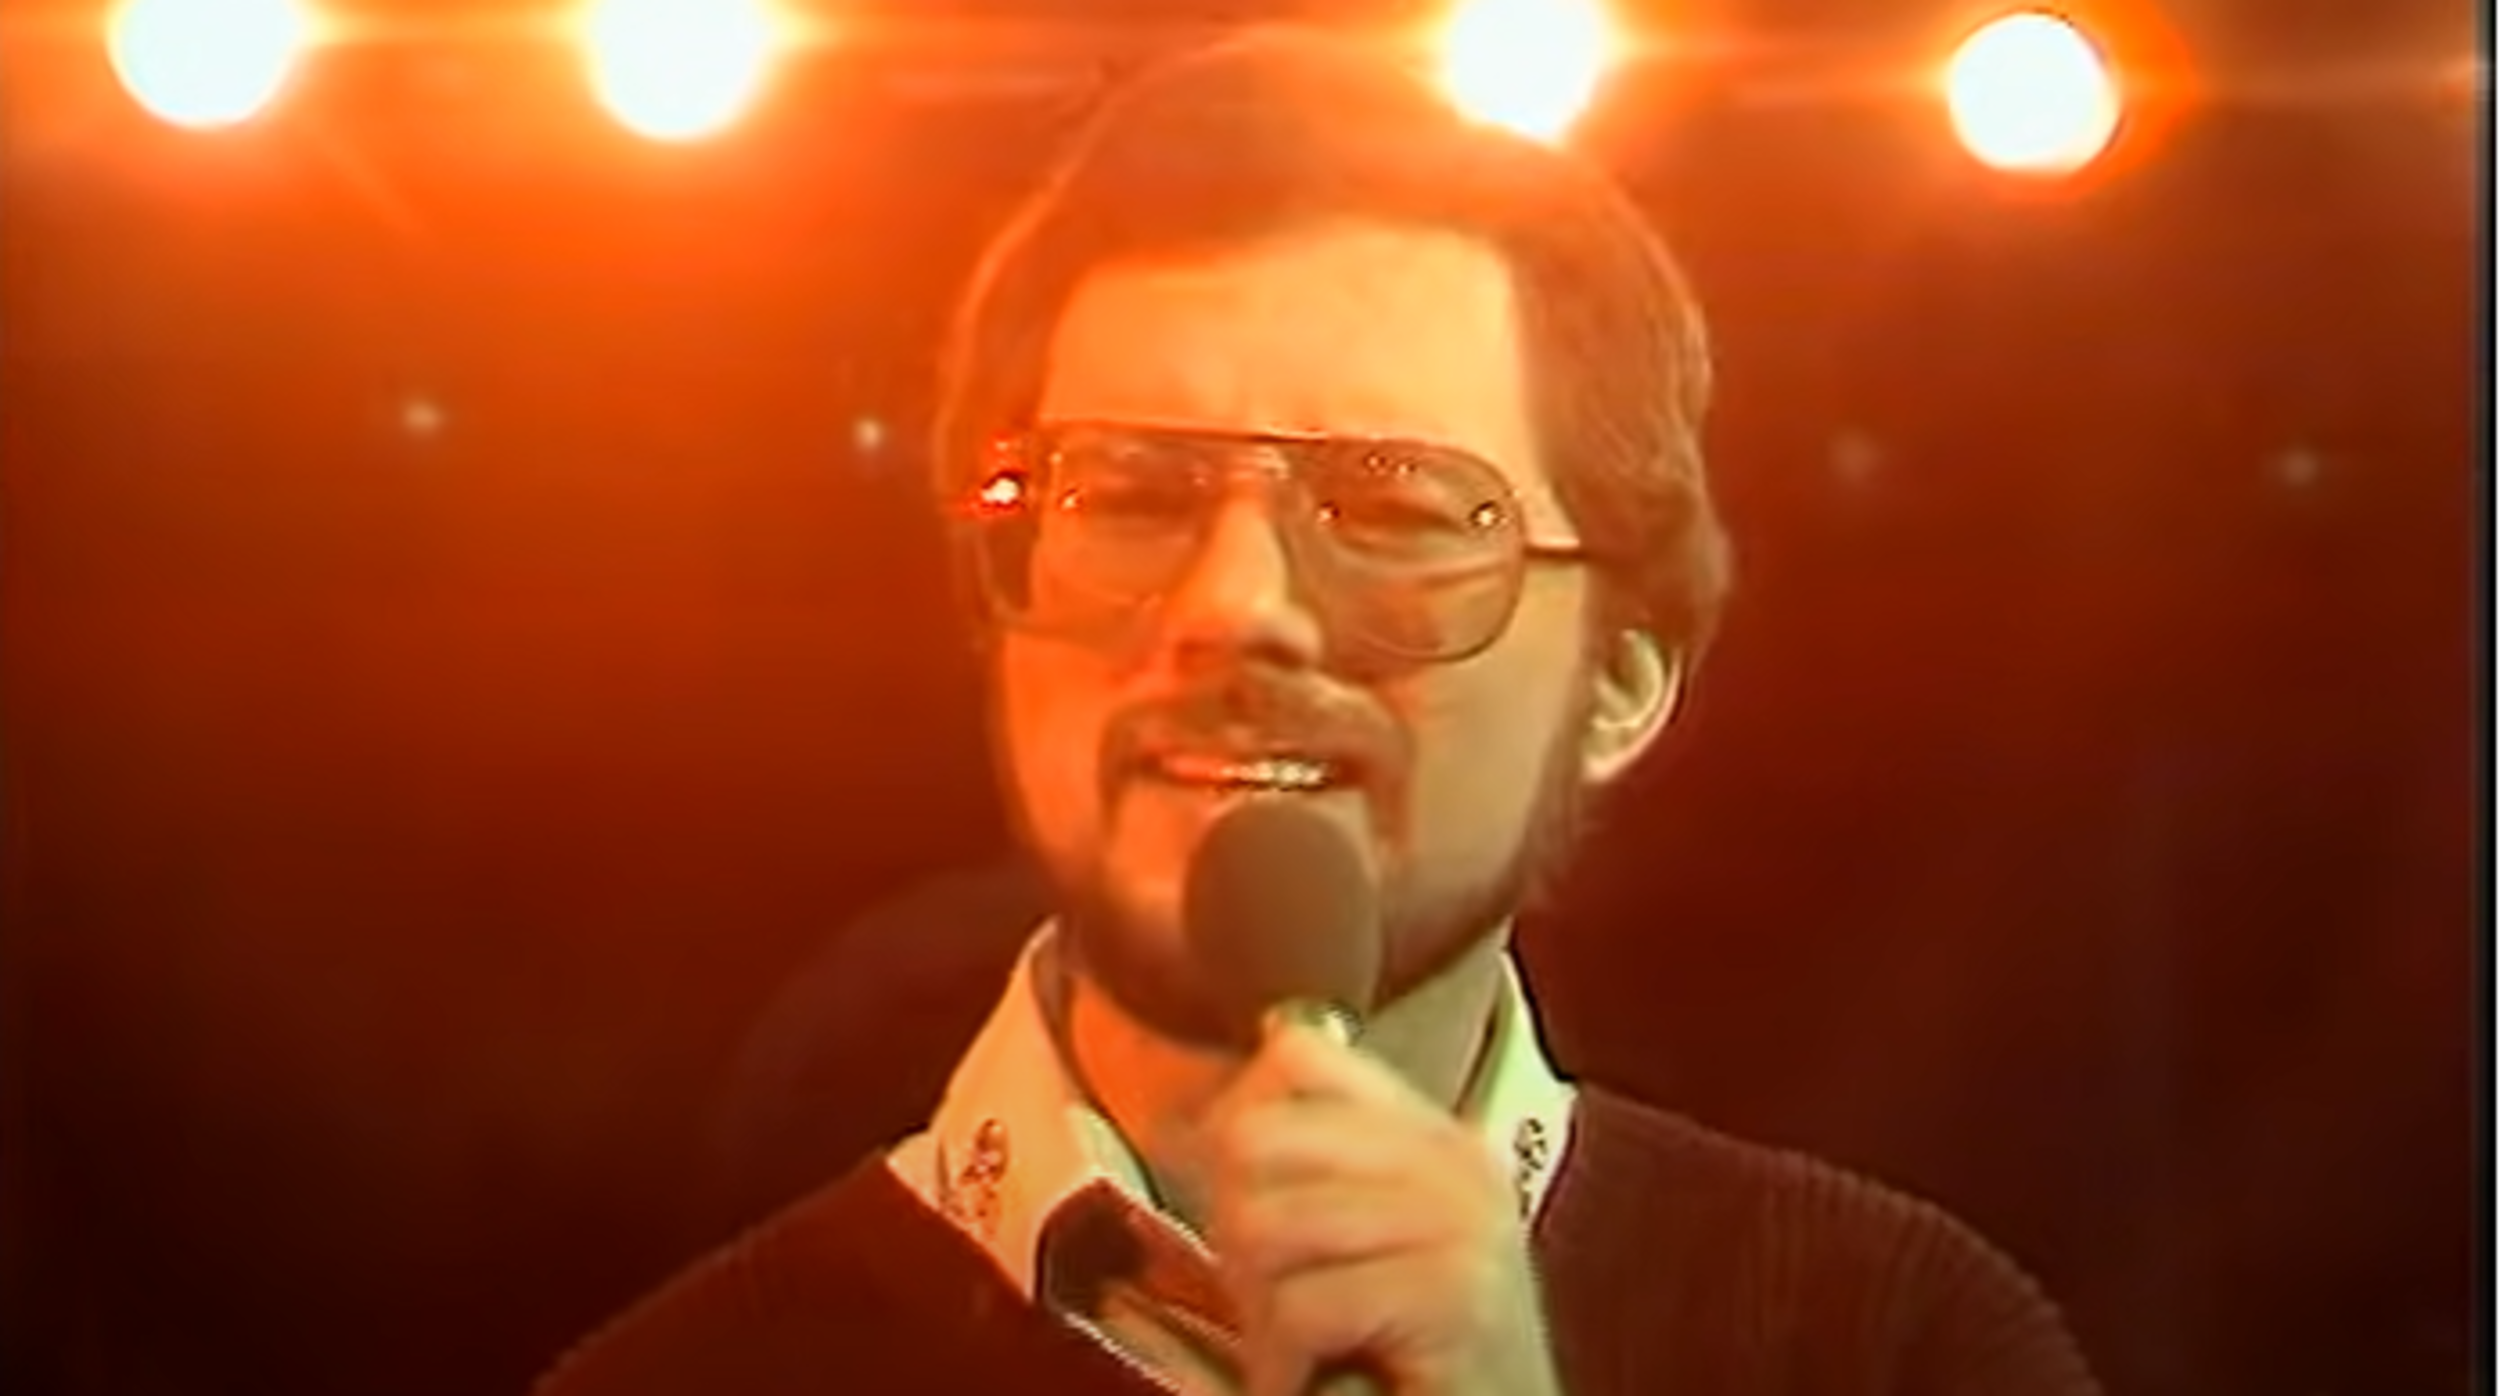 <p>This No.1 <em>Billboard</em> Hot 100 hit for England's Rupert Holmes has achieved a steady cult following over the years. Perhaps, because of the unique title and conjured images of some warm, beach-laden paradise. Yacht rock's association with summer, water, and care-free living, as a backdrop to a romantic story, is one of its appealing aspects. This <a href="https://www.youtube.com/watch?v=zROIlspgOjM">song is about a couple who ultimately patch up a rough relationship through personal ads</a>. Any time somebody of a certain age sips one of these drinks, ideally at some Caribbean resort with the warm winds off the ocean blowing, "The Pina Colada Song" should come to mind.</p><p>You may also like: <a href='https://www.yardbarker.com/entertainment/articles/20_movies_that_should_never_be_remade_022424/s1__39030994'>20 movies that should never be remade</a></p>